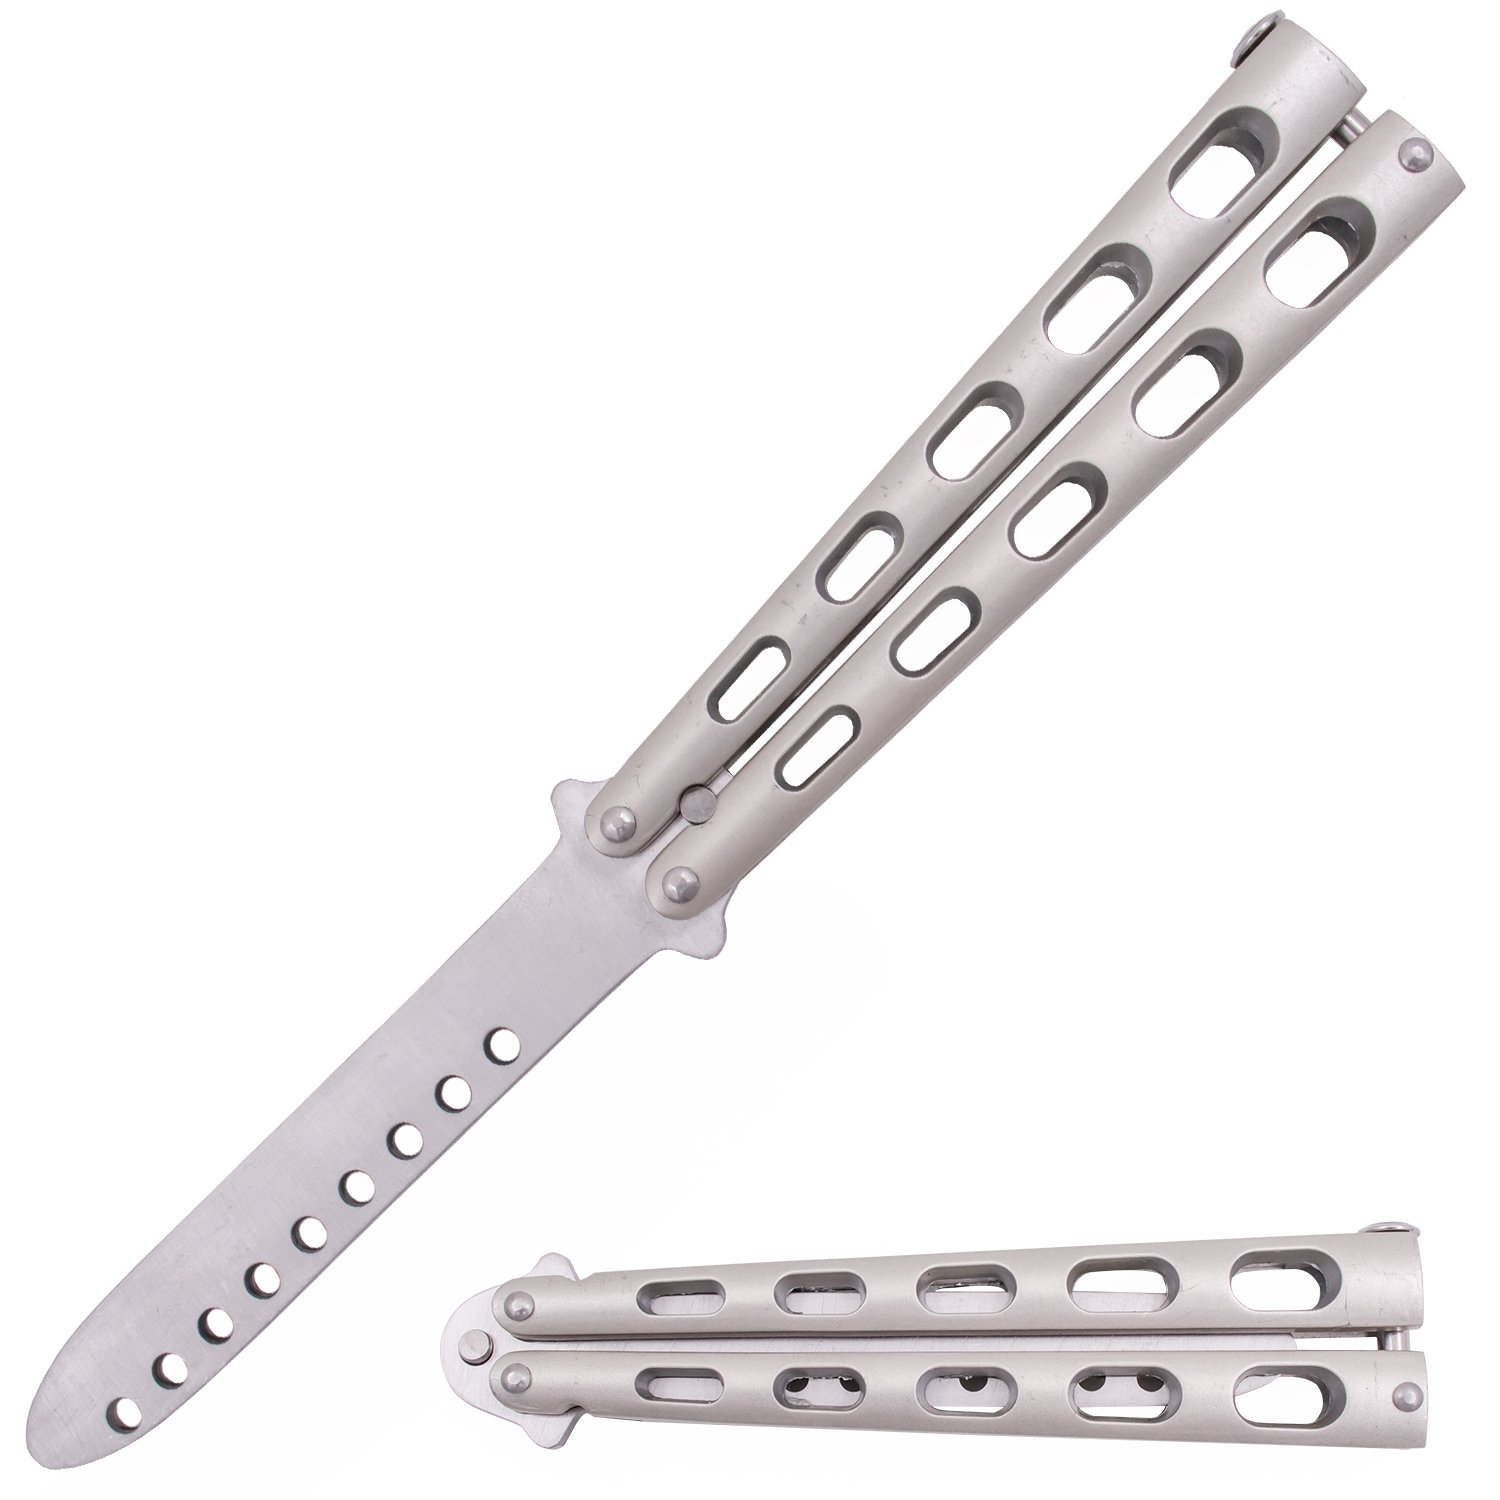 Tiger USA Butterfly Training Knife 440 Stainless 8.85 Inch   Silver